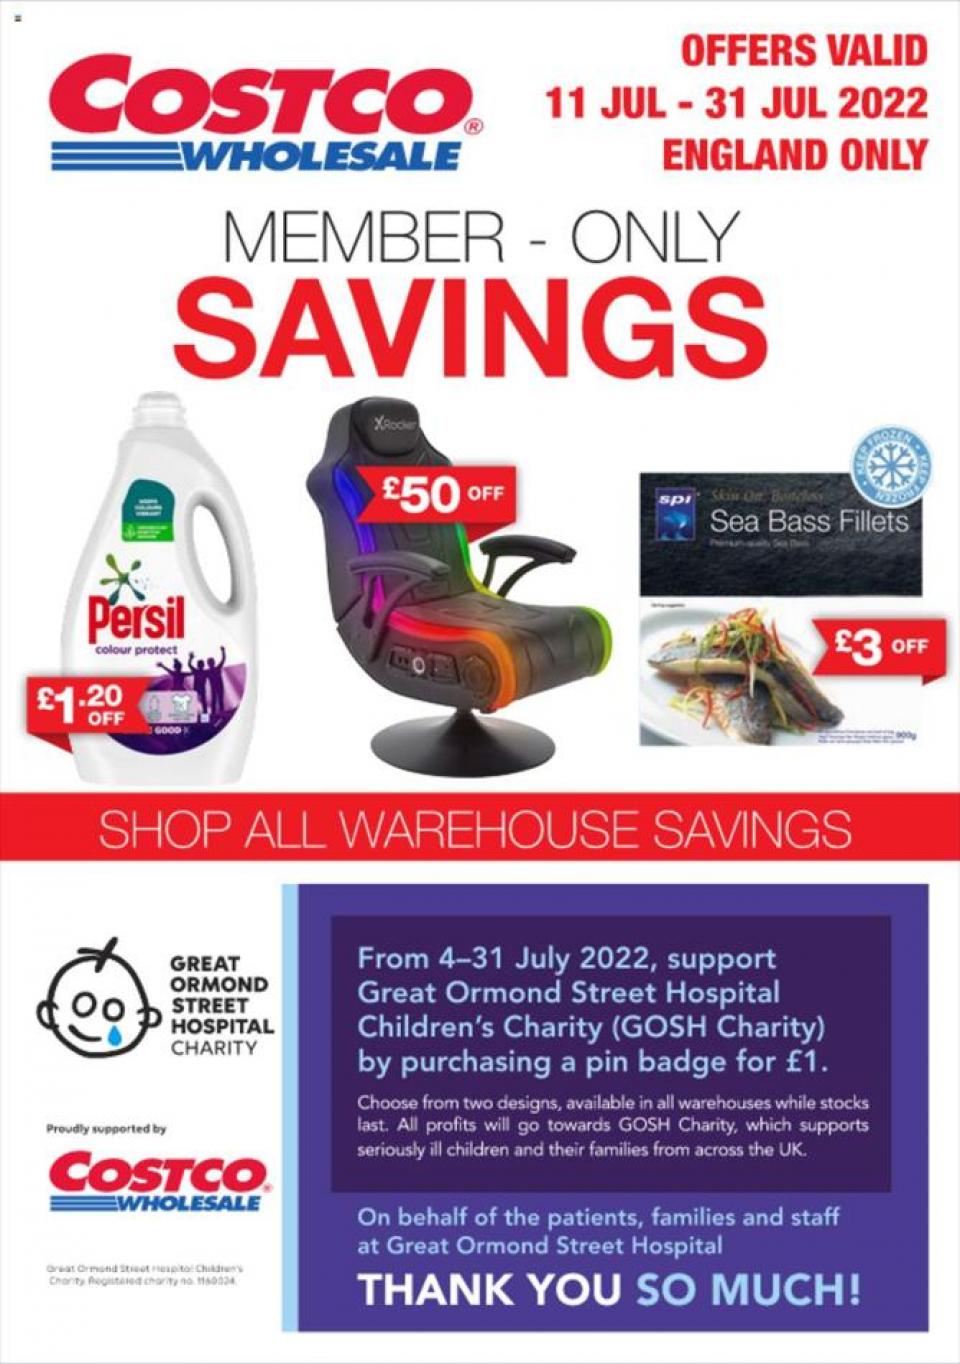 Costco Offers Member-Only Savings 11 – 31 July 2022